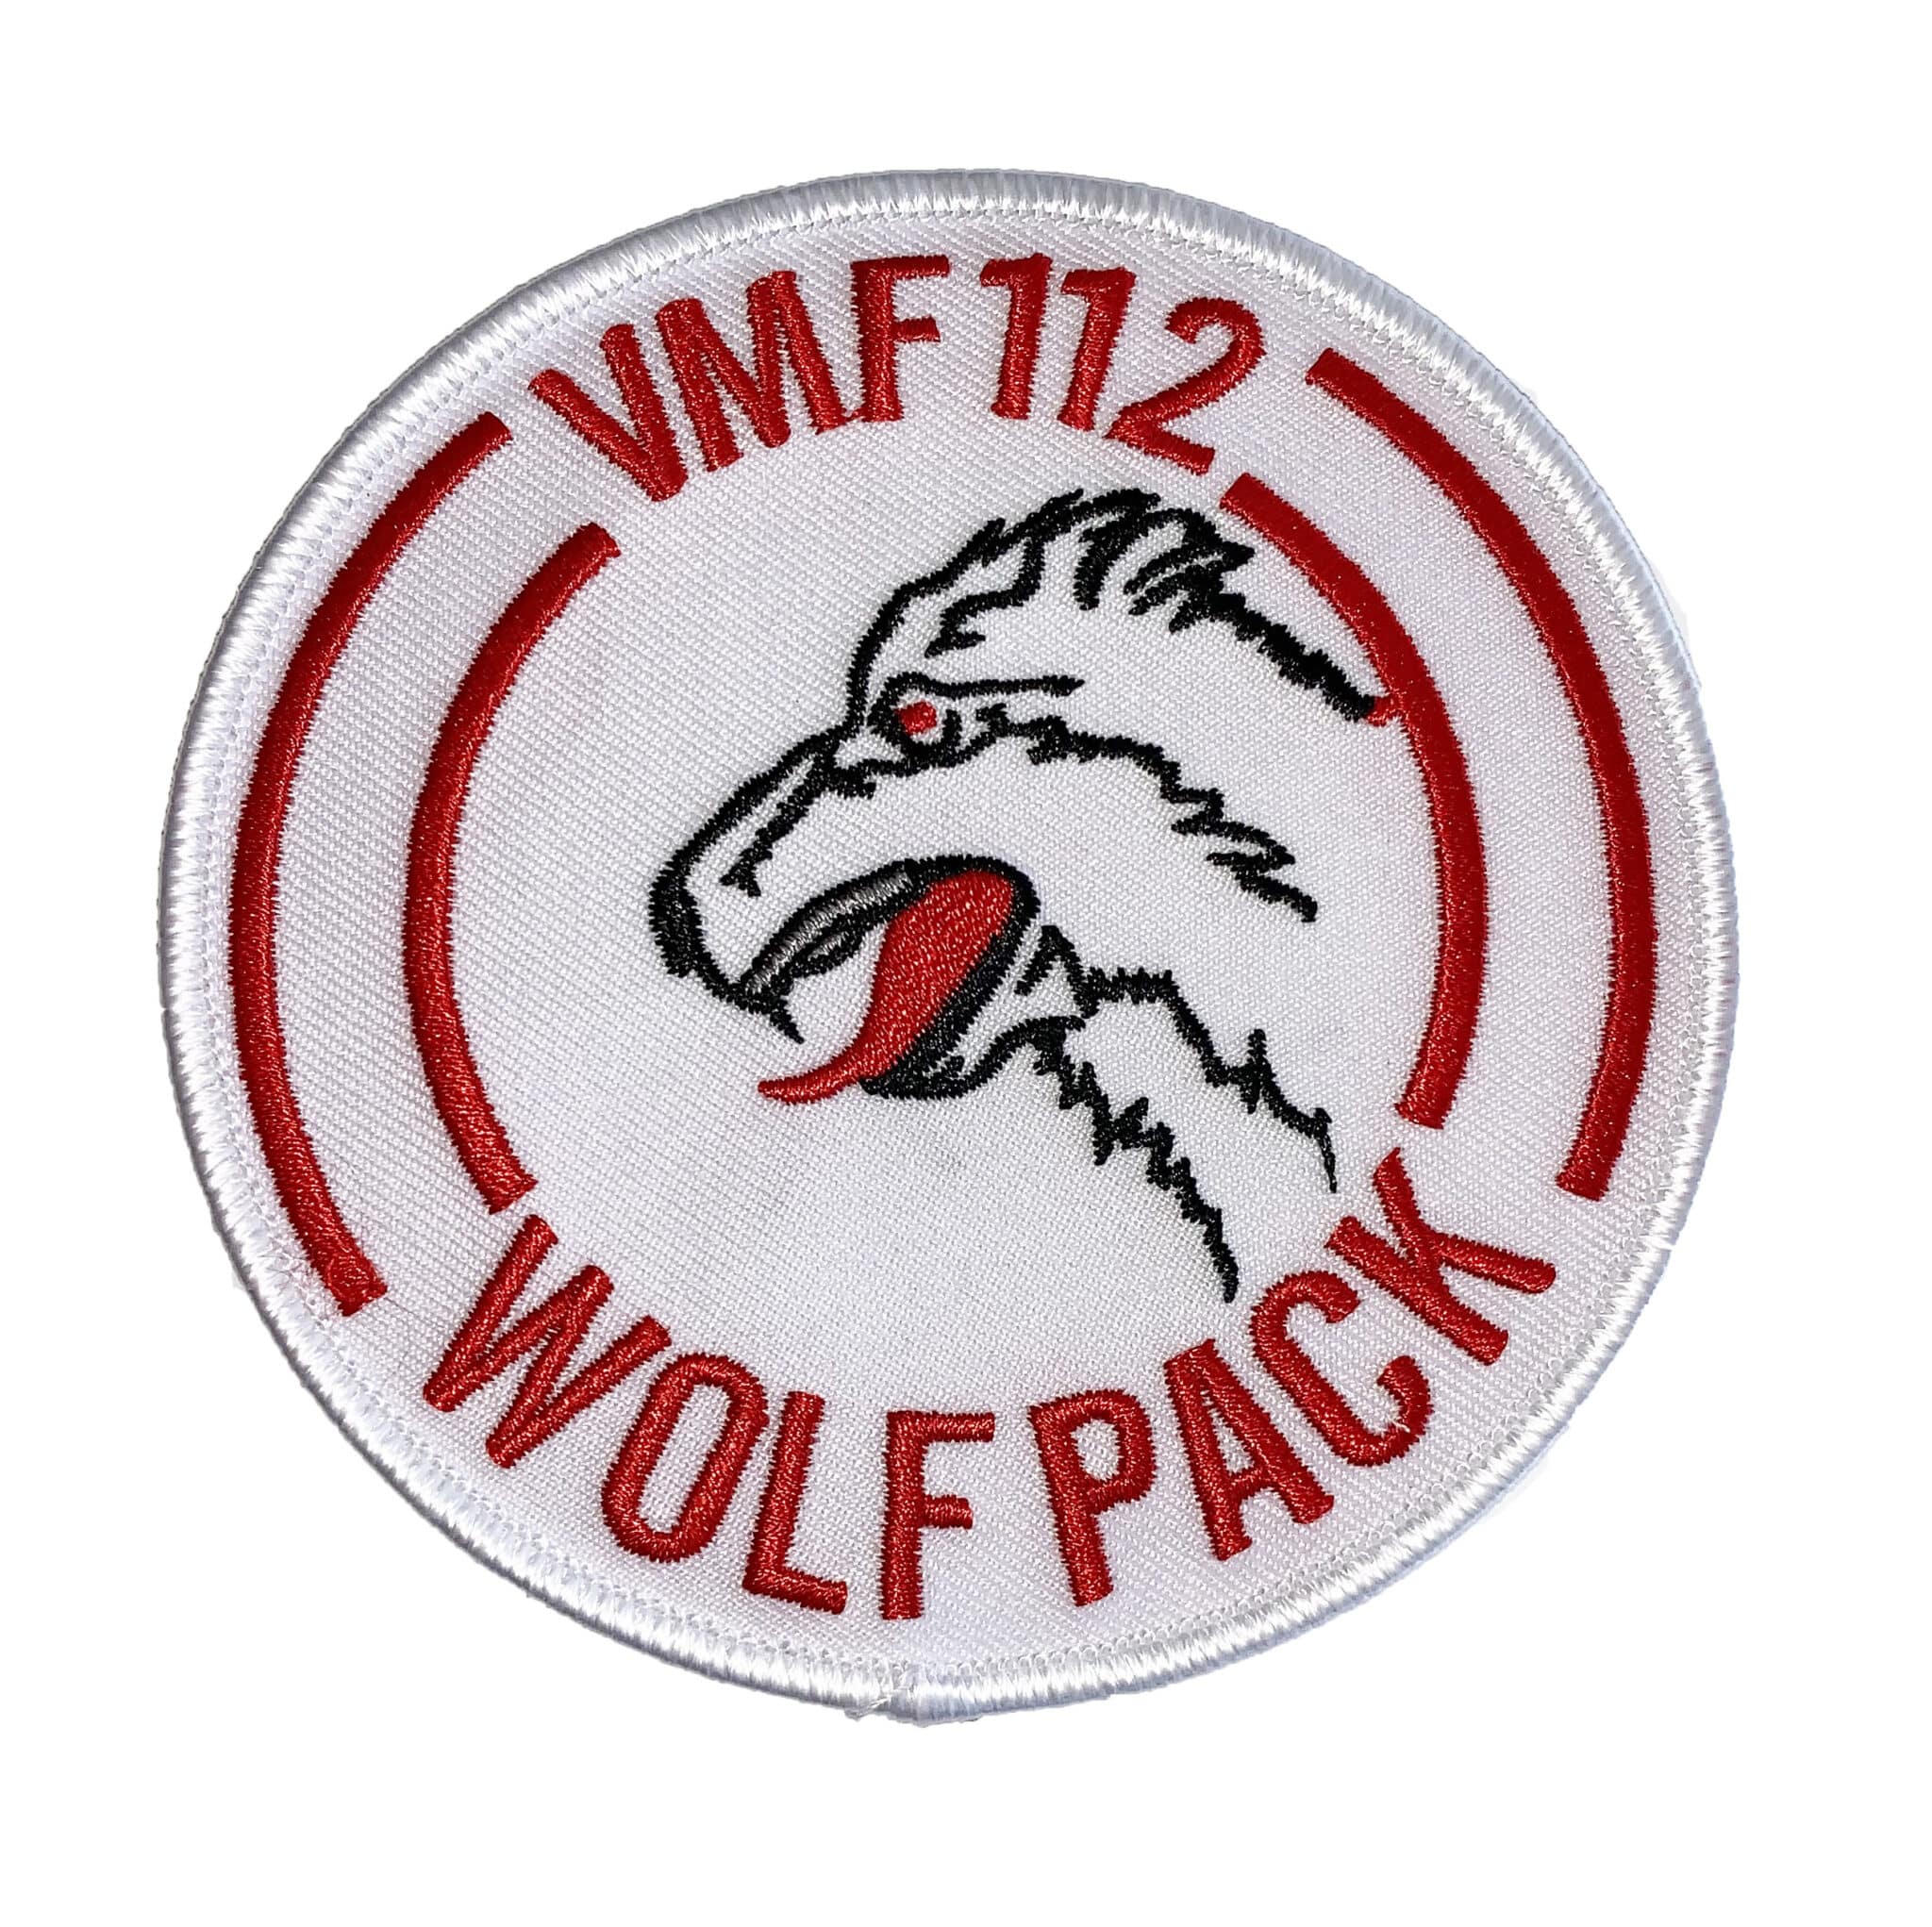 VMF-112 Wolf Pack Squadron Patch – Sew On